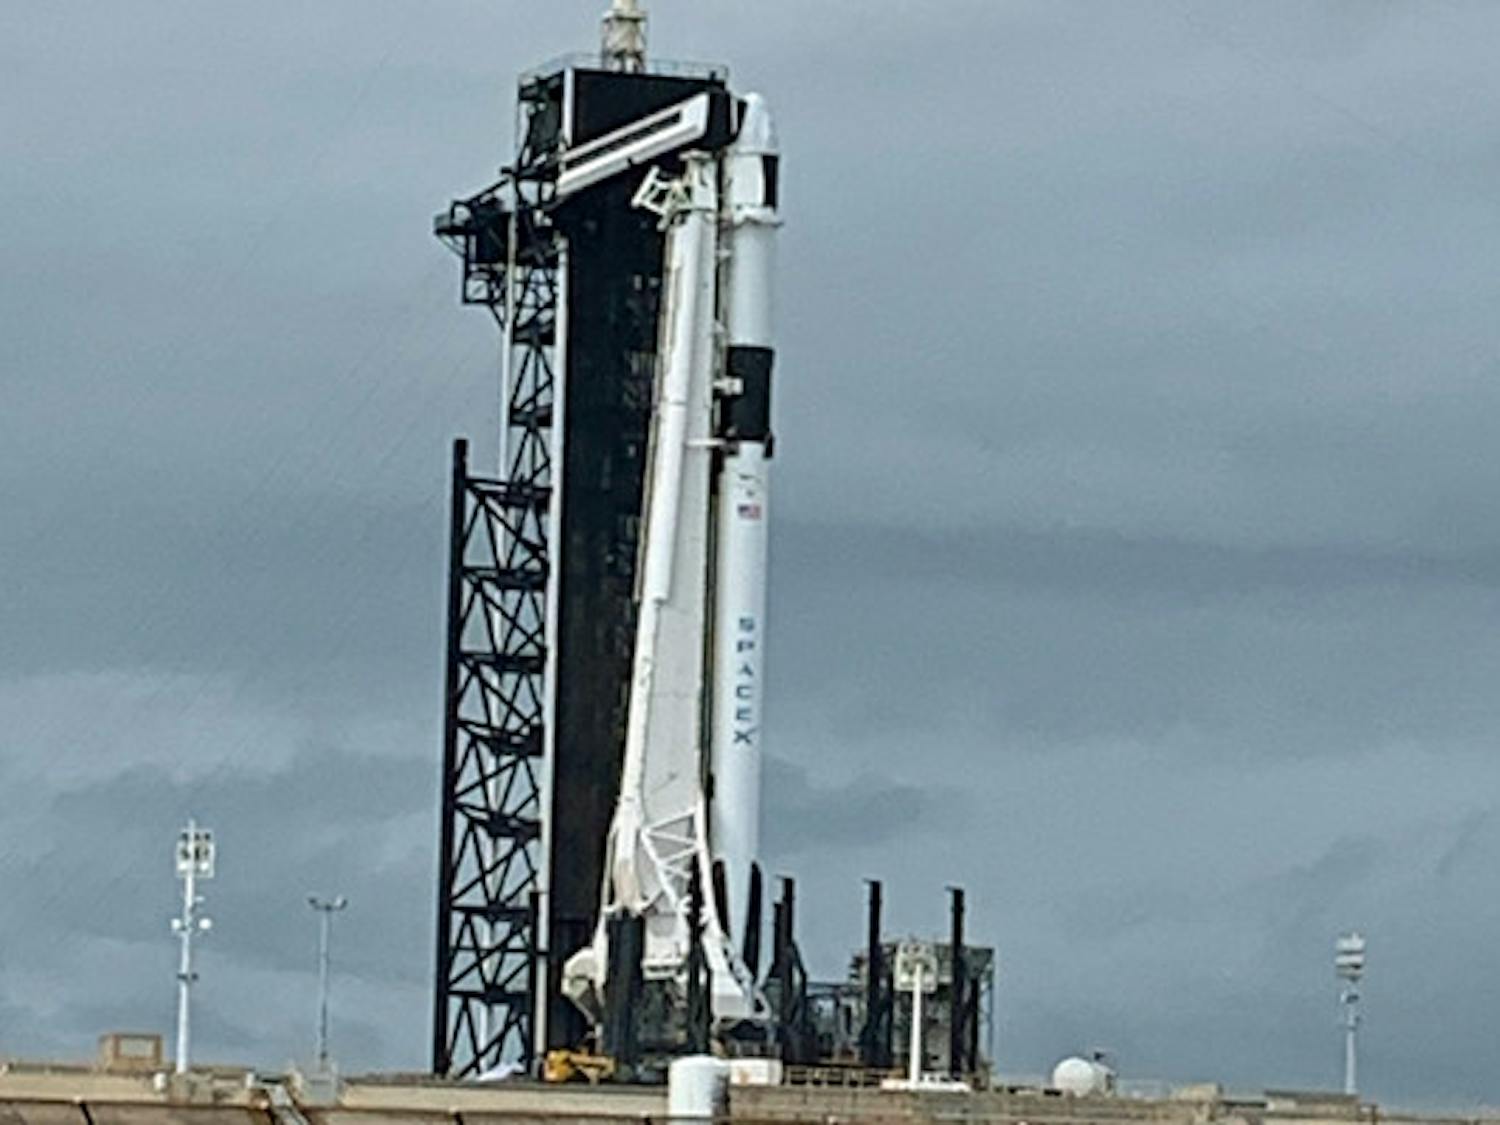 SpaceX rocket on launch pad 600.jpg